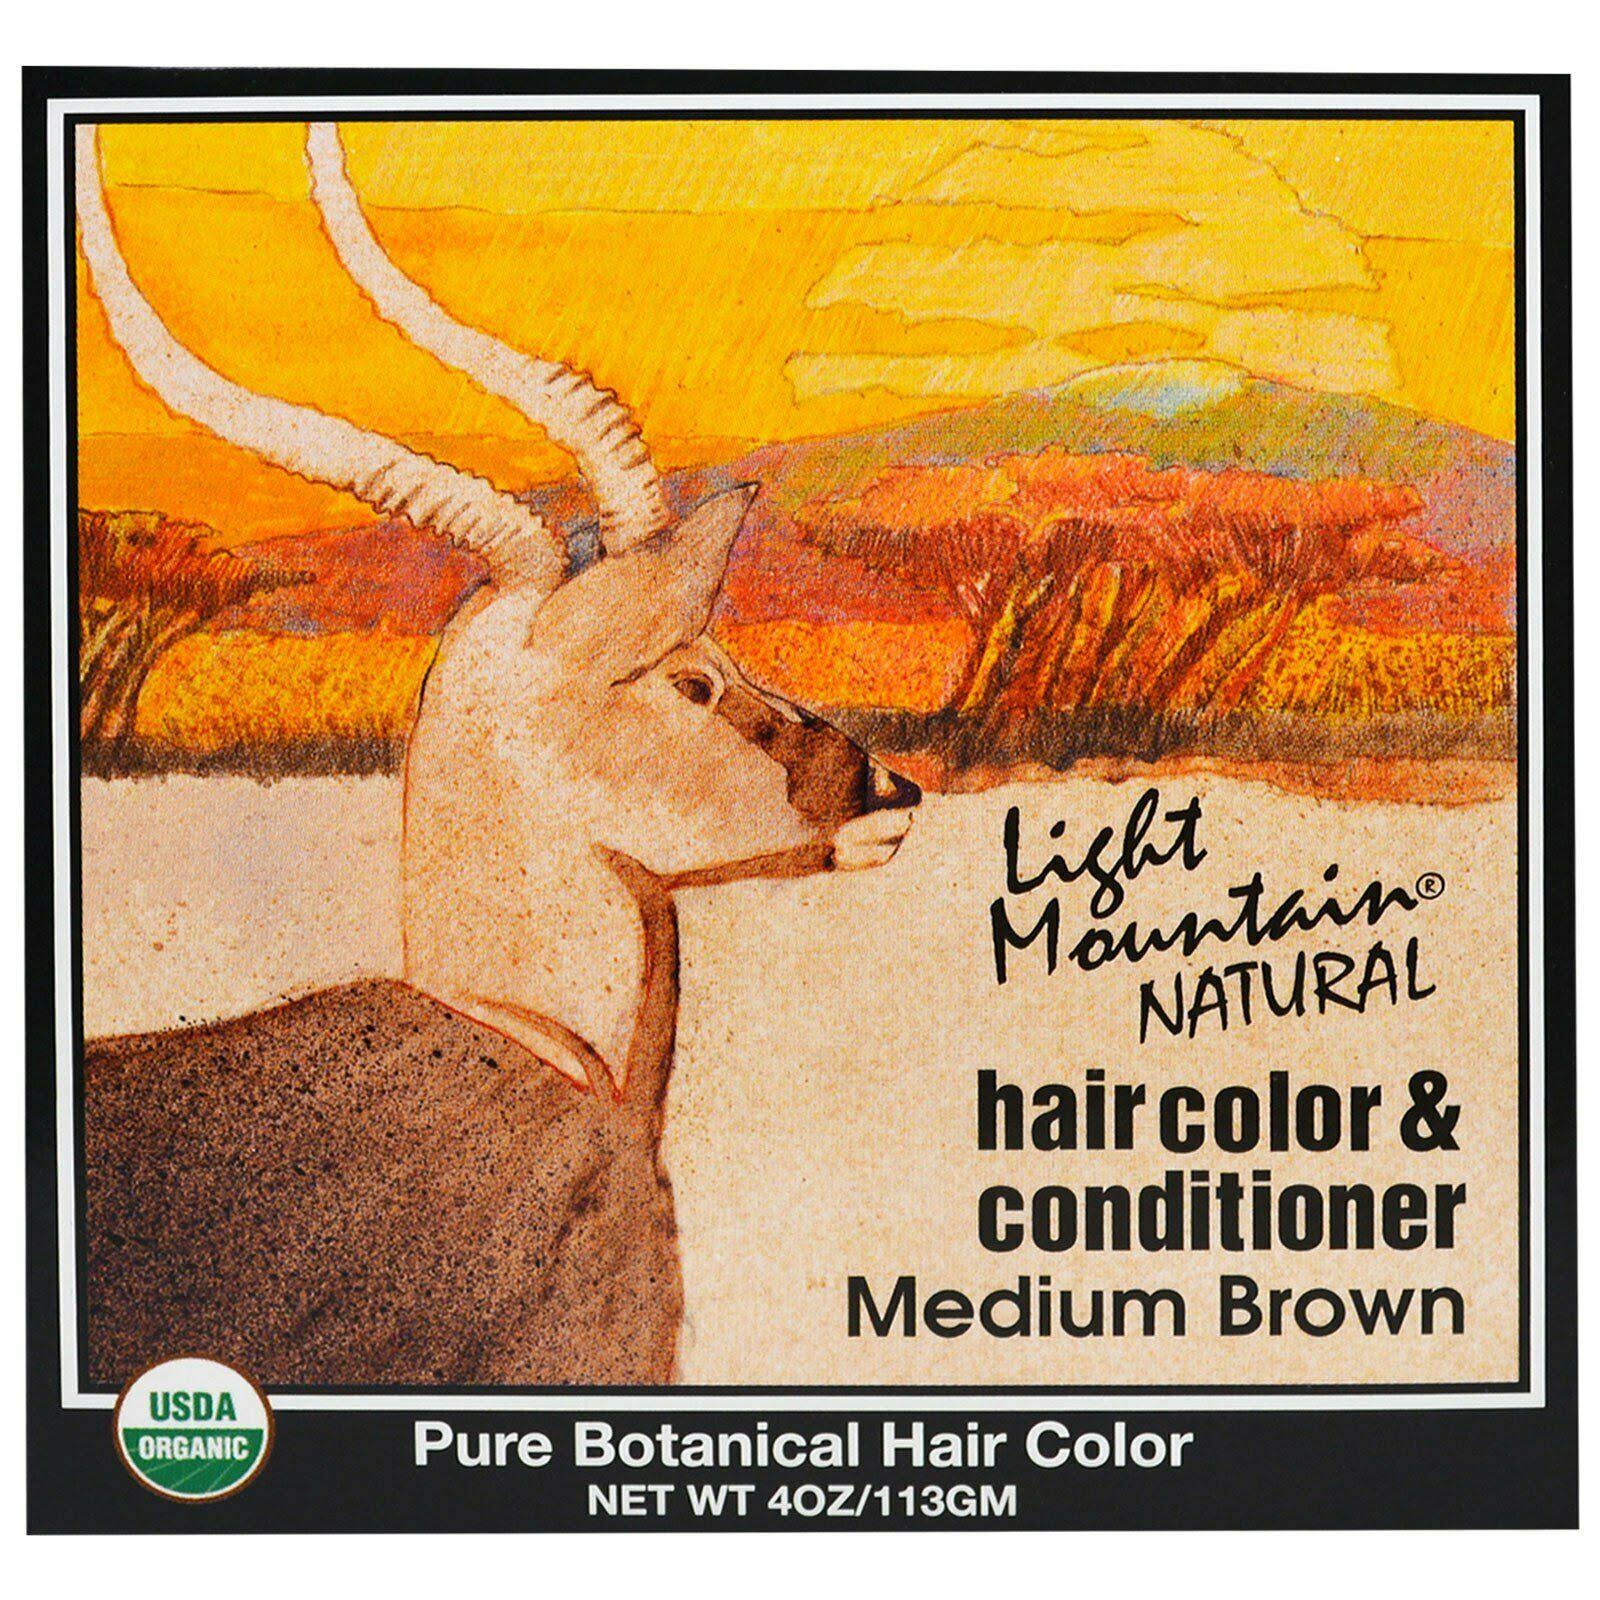 Light Mountain Natural Hair Color & Conditioner - Medium Brown, 113g